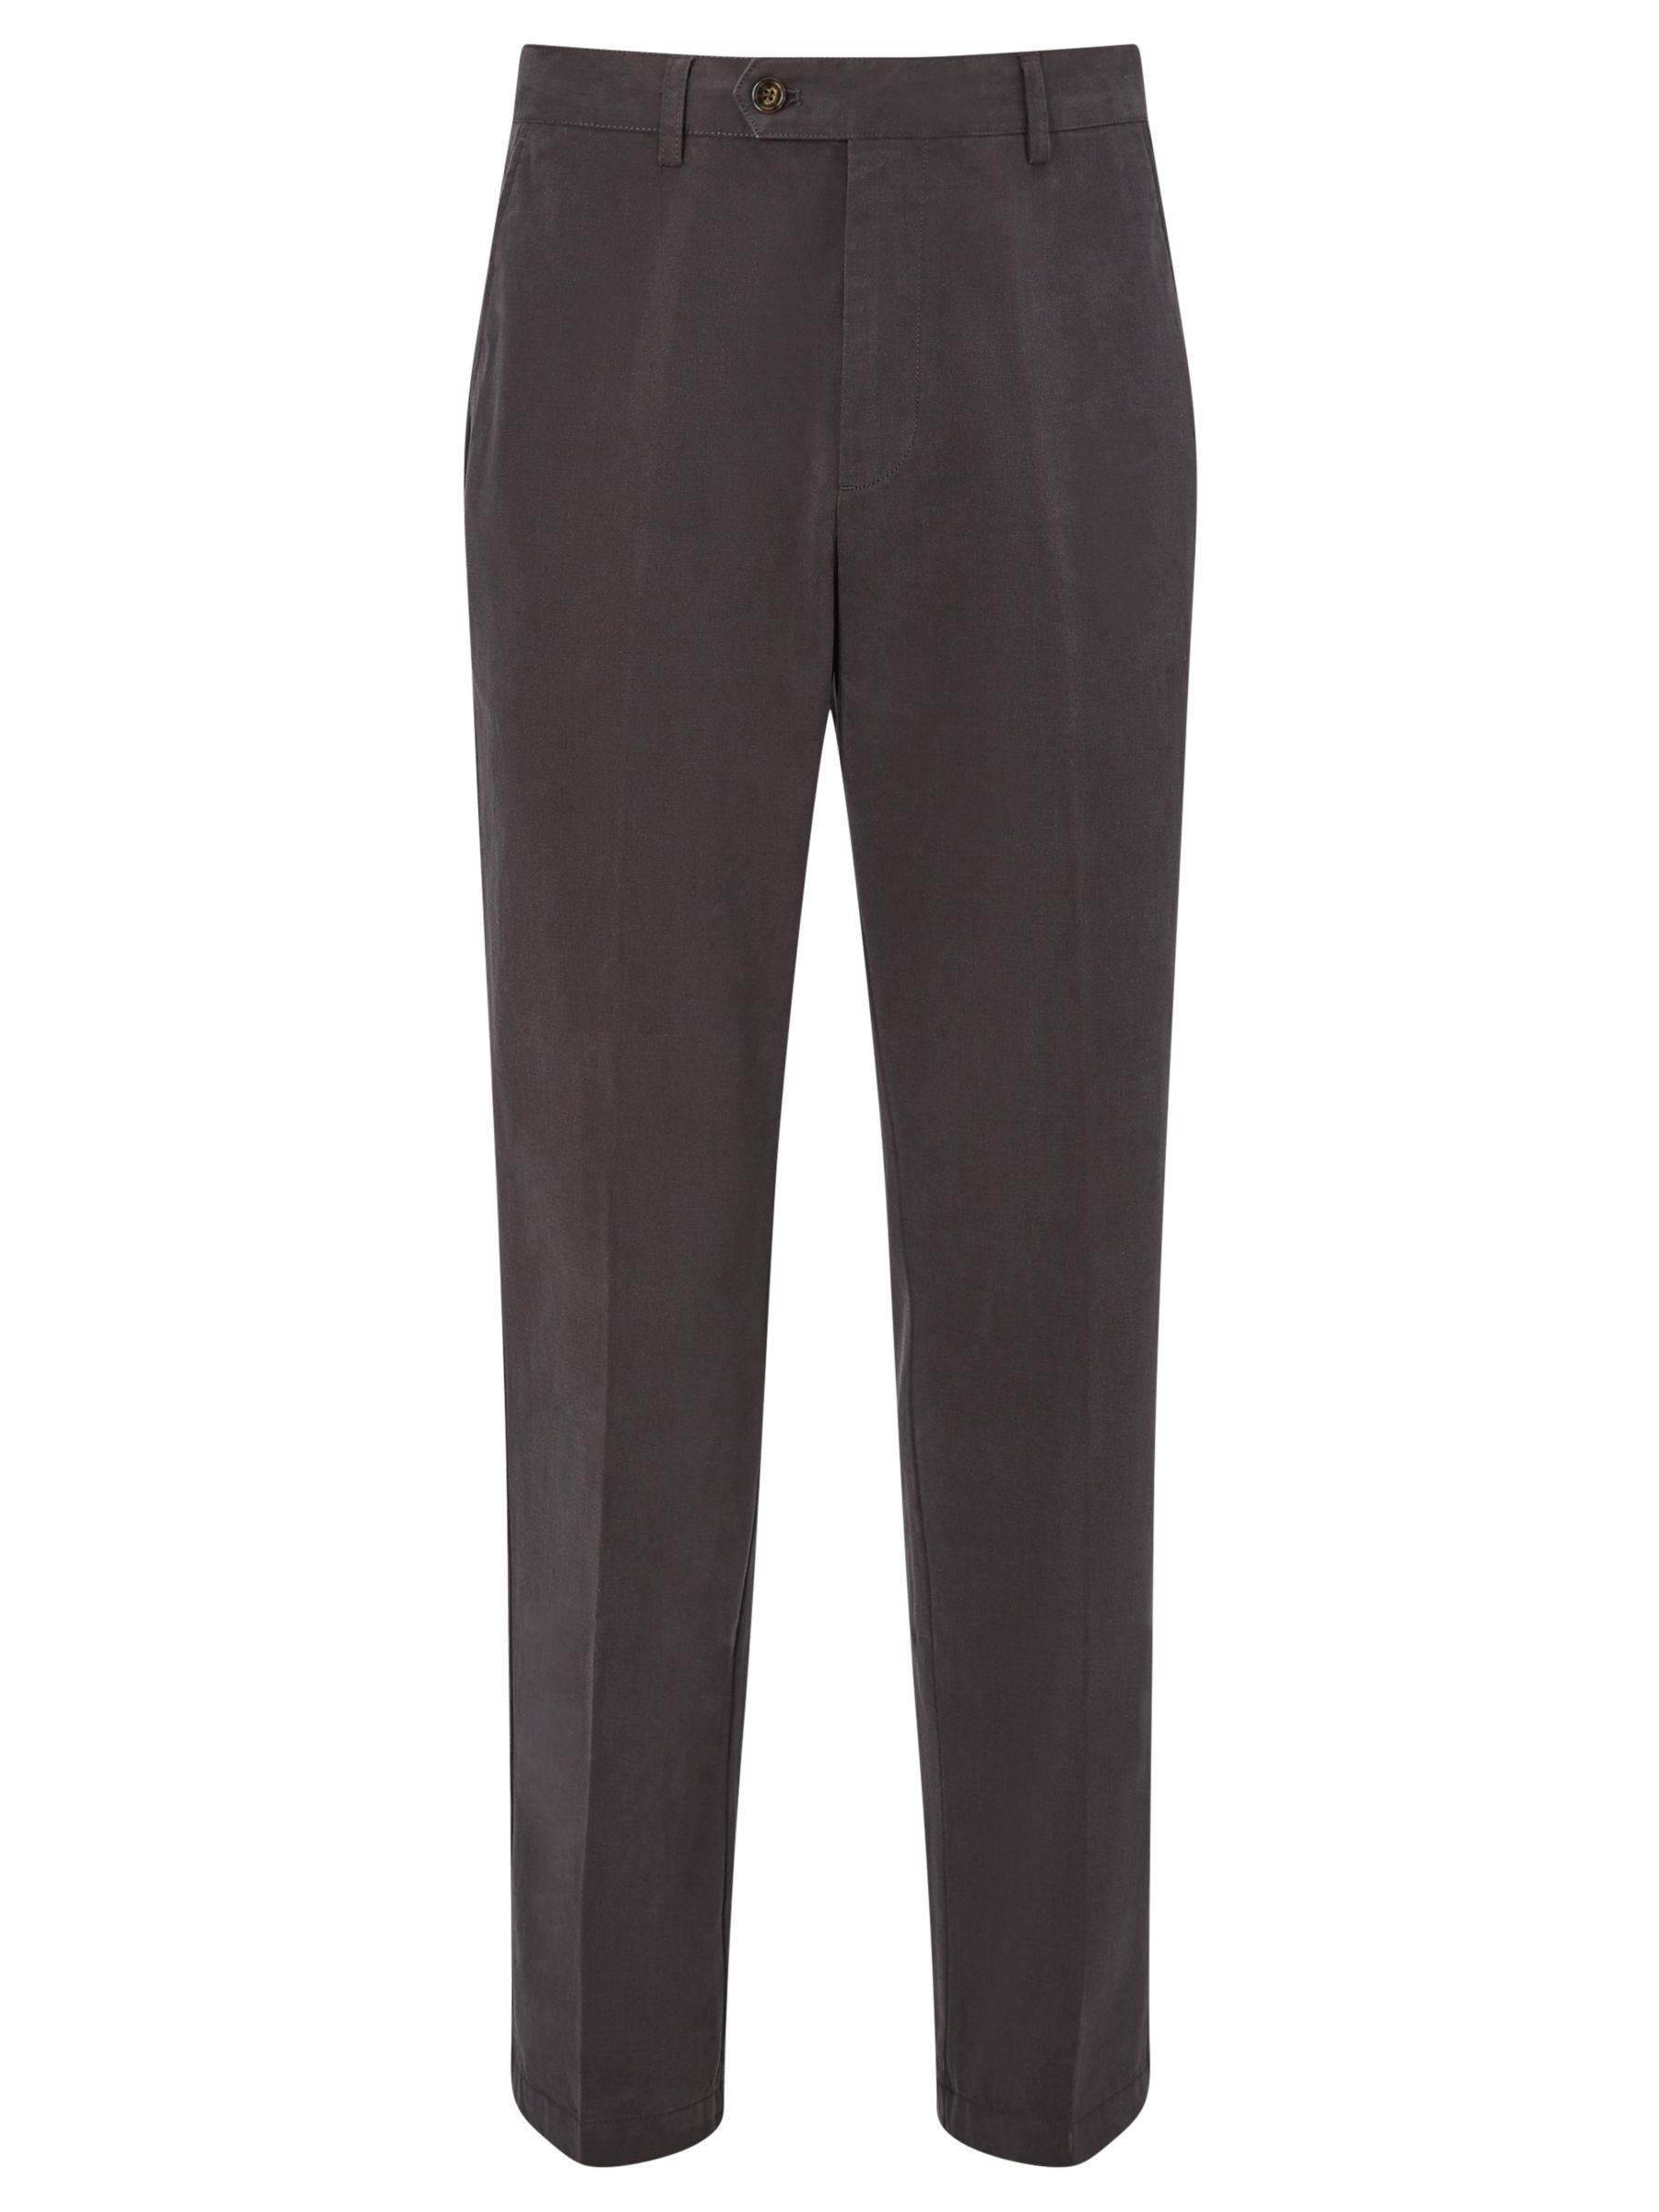 John Lewis & Partners Wrinkle Free Flat Front Trousers, Grey, 38S